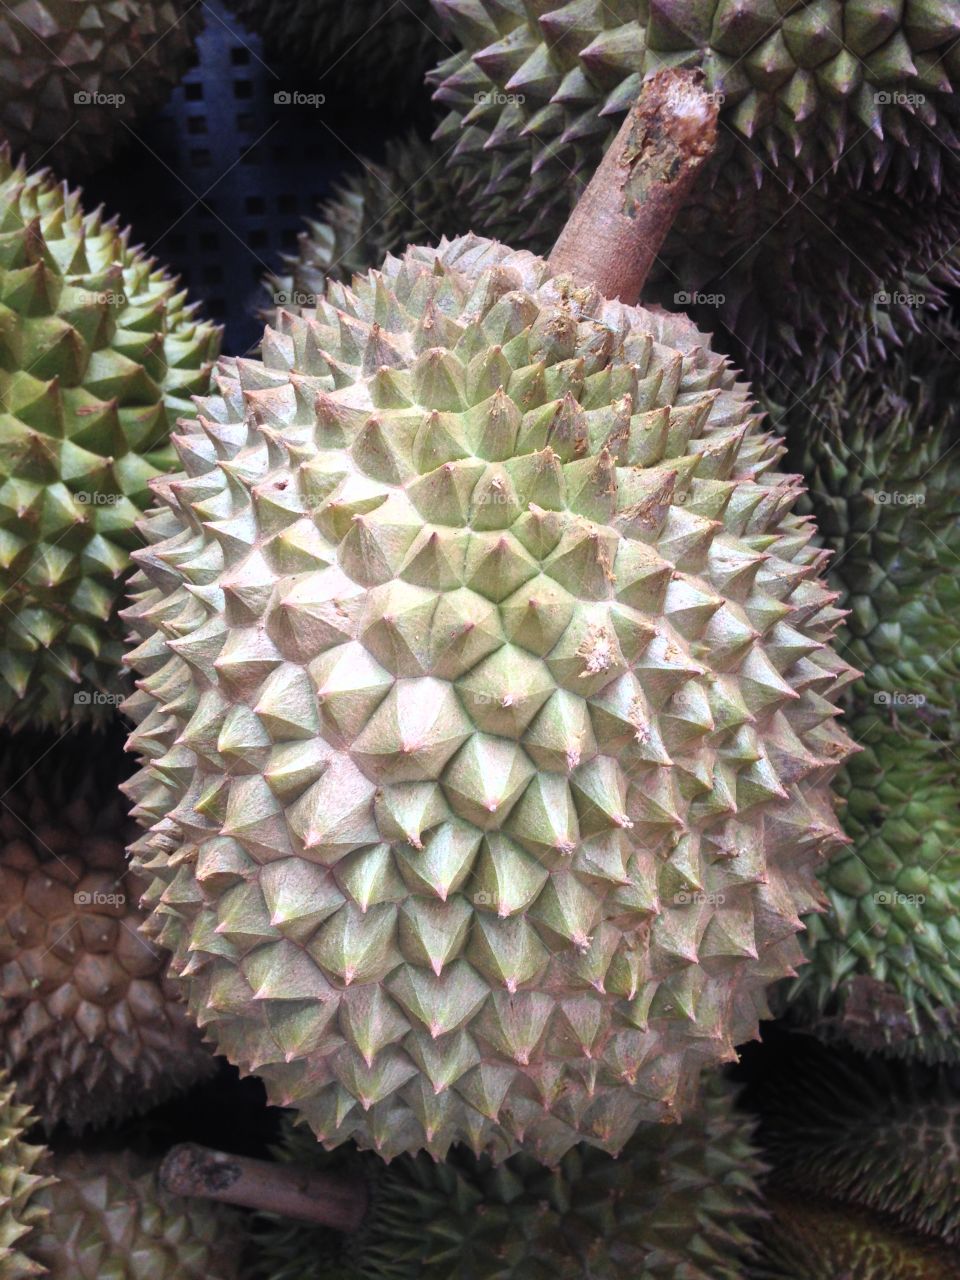 Durian. The king of fruits - durian